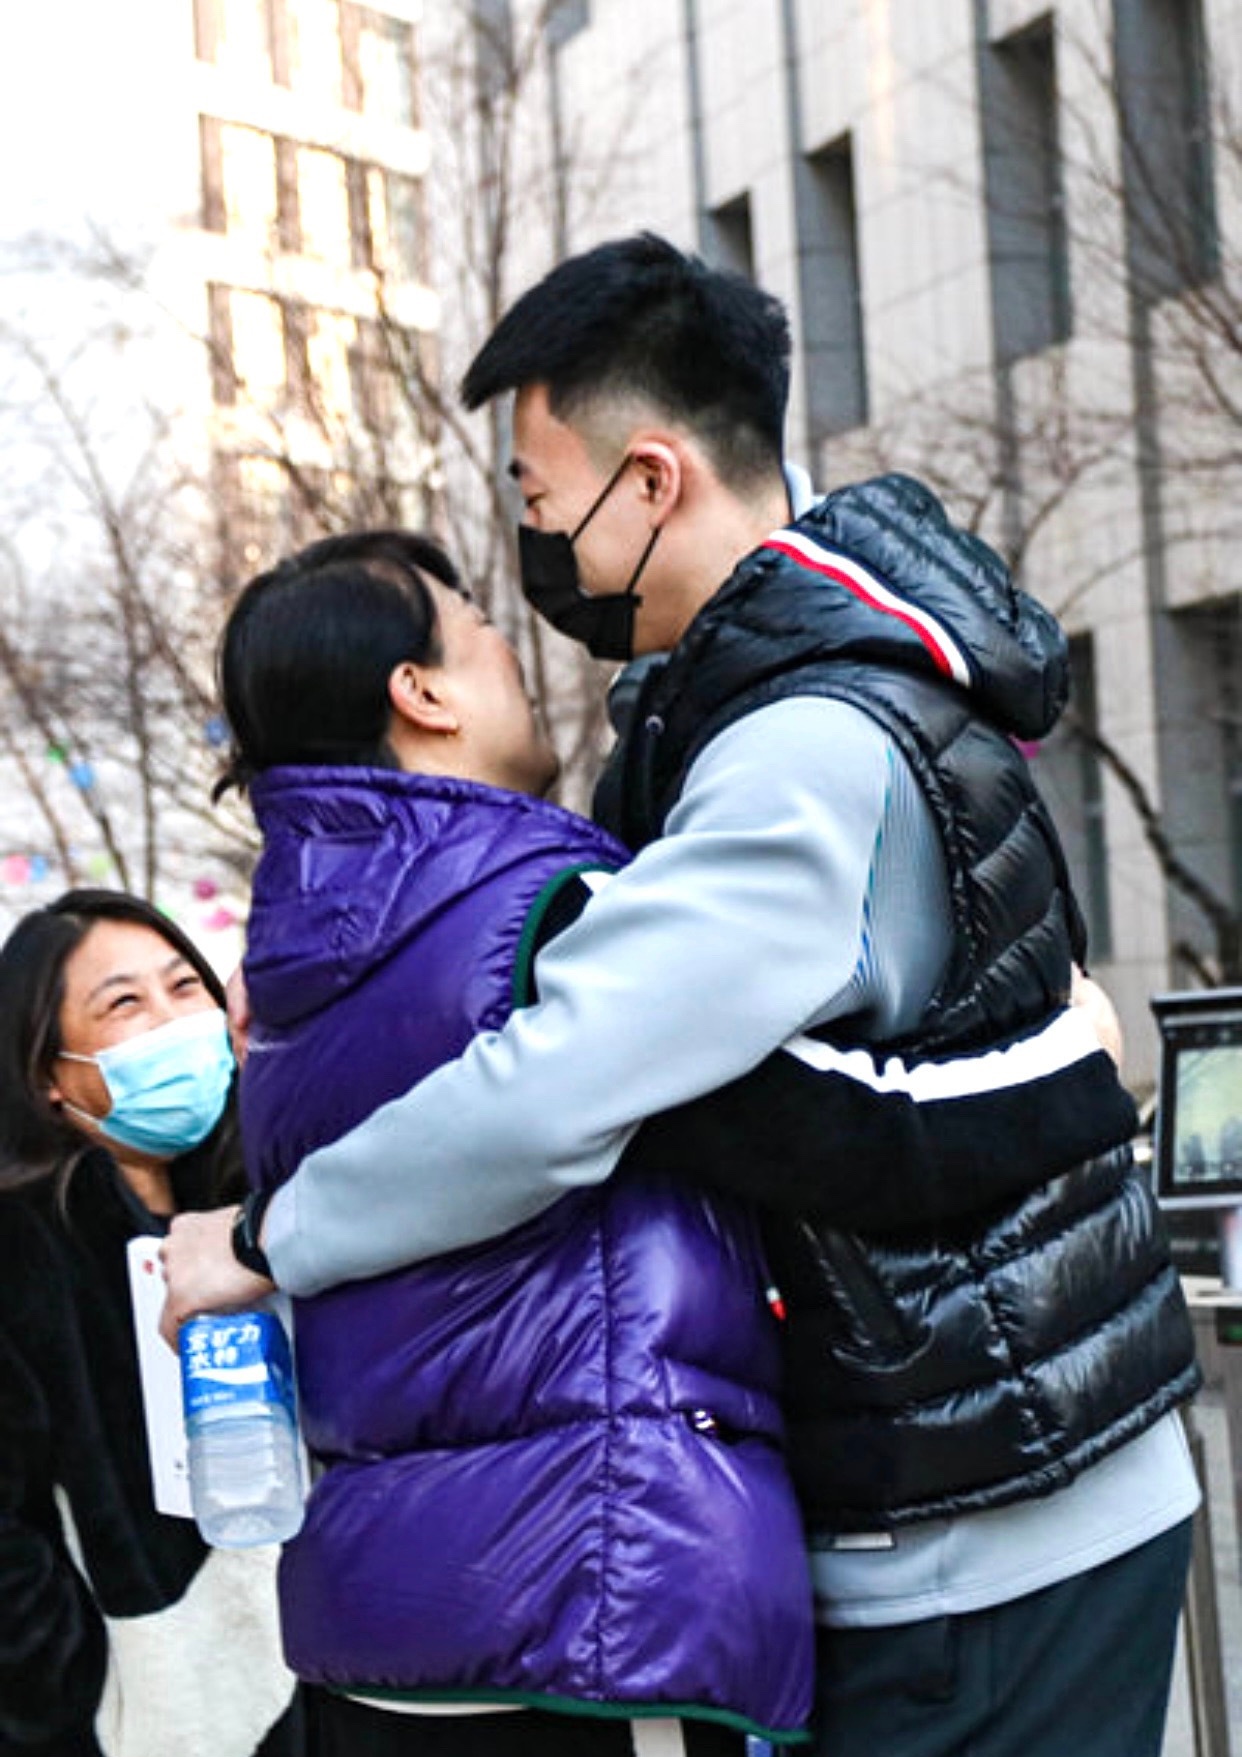 Before Zhang Zhenlin sets out, with mom hug! Old son of a feudal prince or high official: 